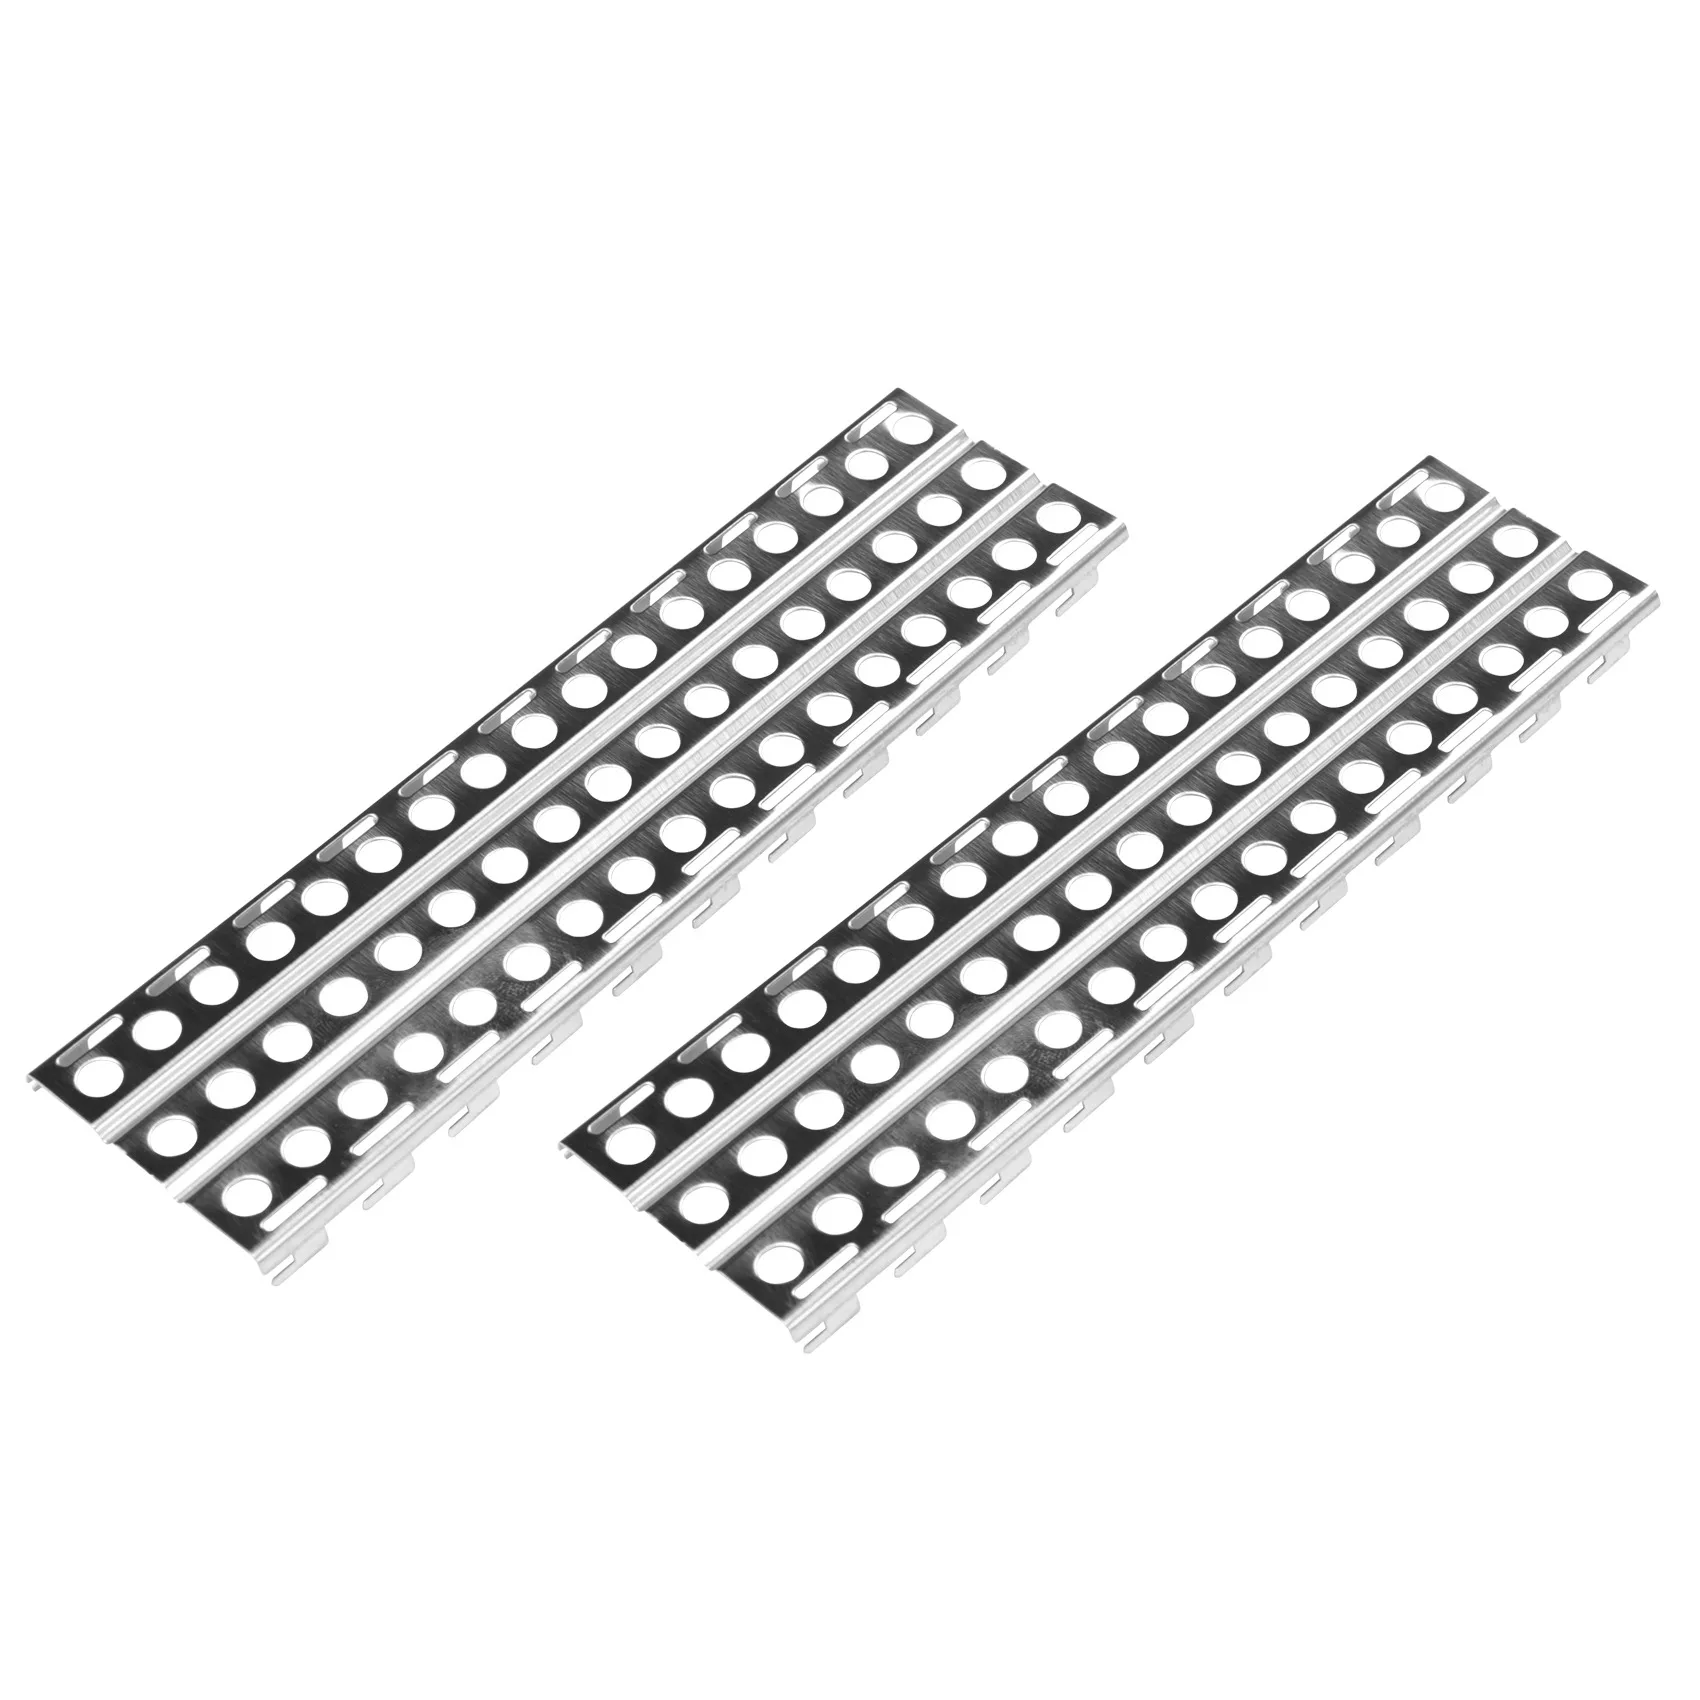 

2Pcs Stainless Steel Sand Ladders Board for Axial SCX10 TRX-4 D90 1/10 RC Crawler Car